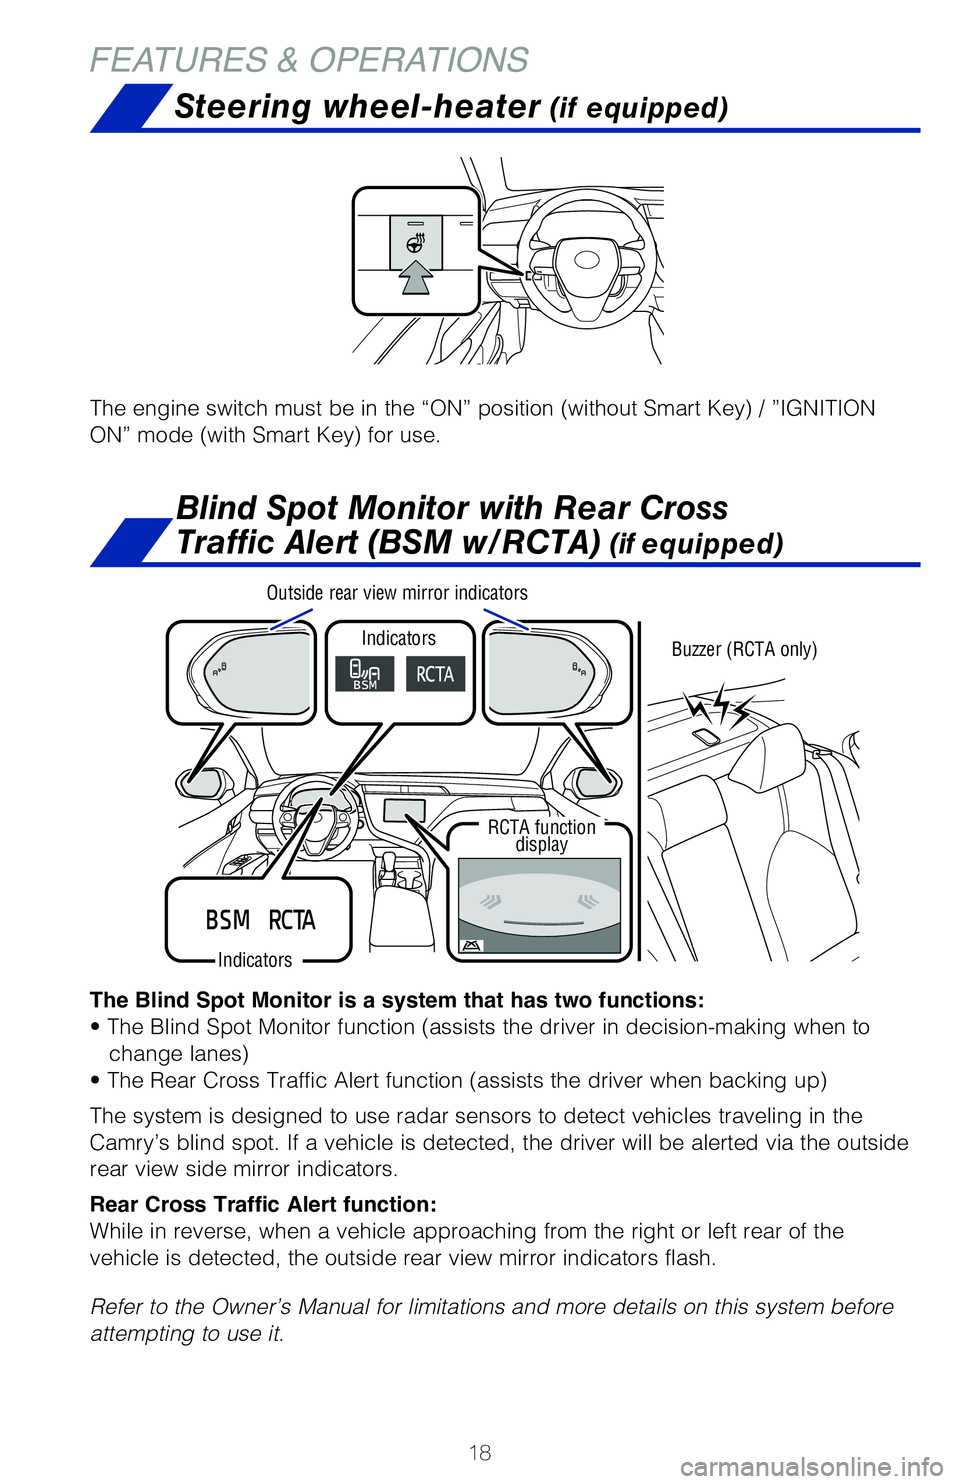 TOYOTA CAMRY 2020  Owners Manual (in English) 18
FEATURES & OPERATIONS
The Blind Spot Monitor is a system that has two functions:
• The Blind Spot Monitor function (assists the driver in decision-making when to change lanes)
• The Rear Cross 